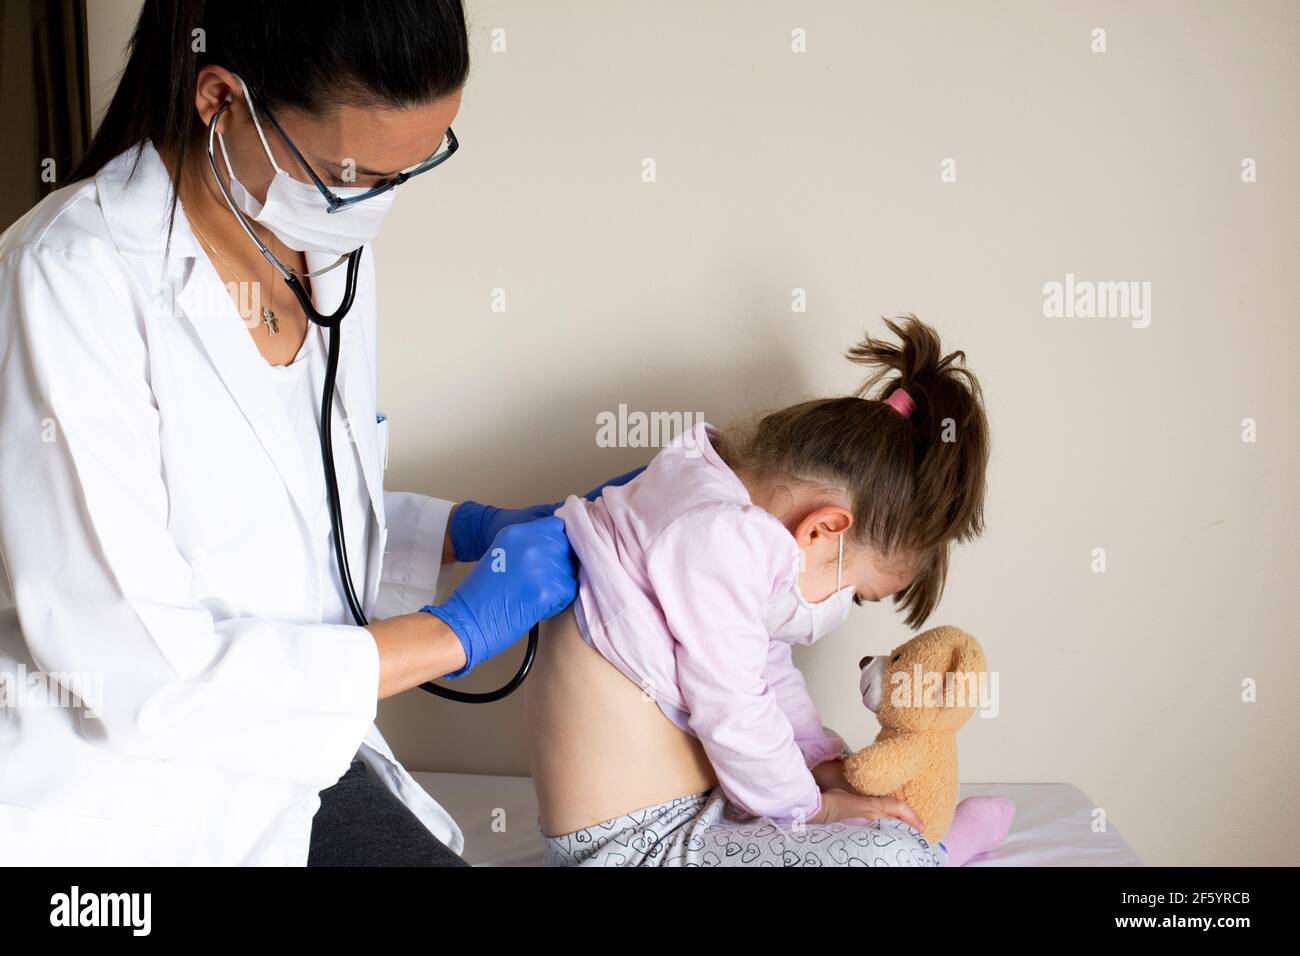 chubby little girl in pediatric examination by her doctor. the doctor listens to your lungs and heart. they wear protective face masks Stock Photo